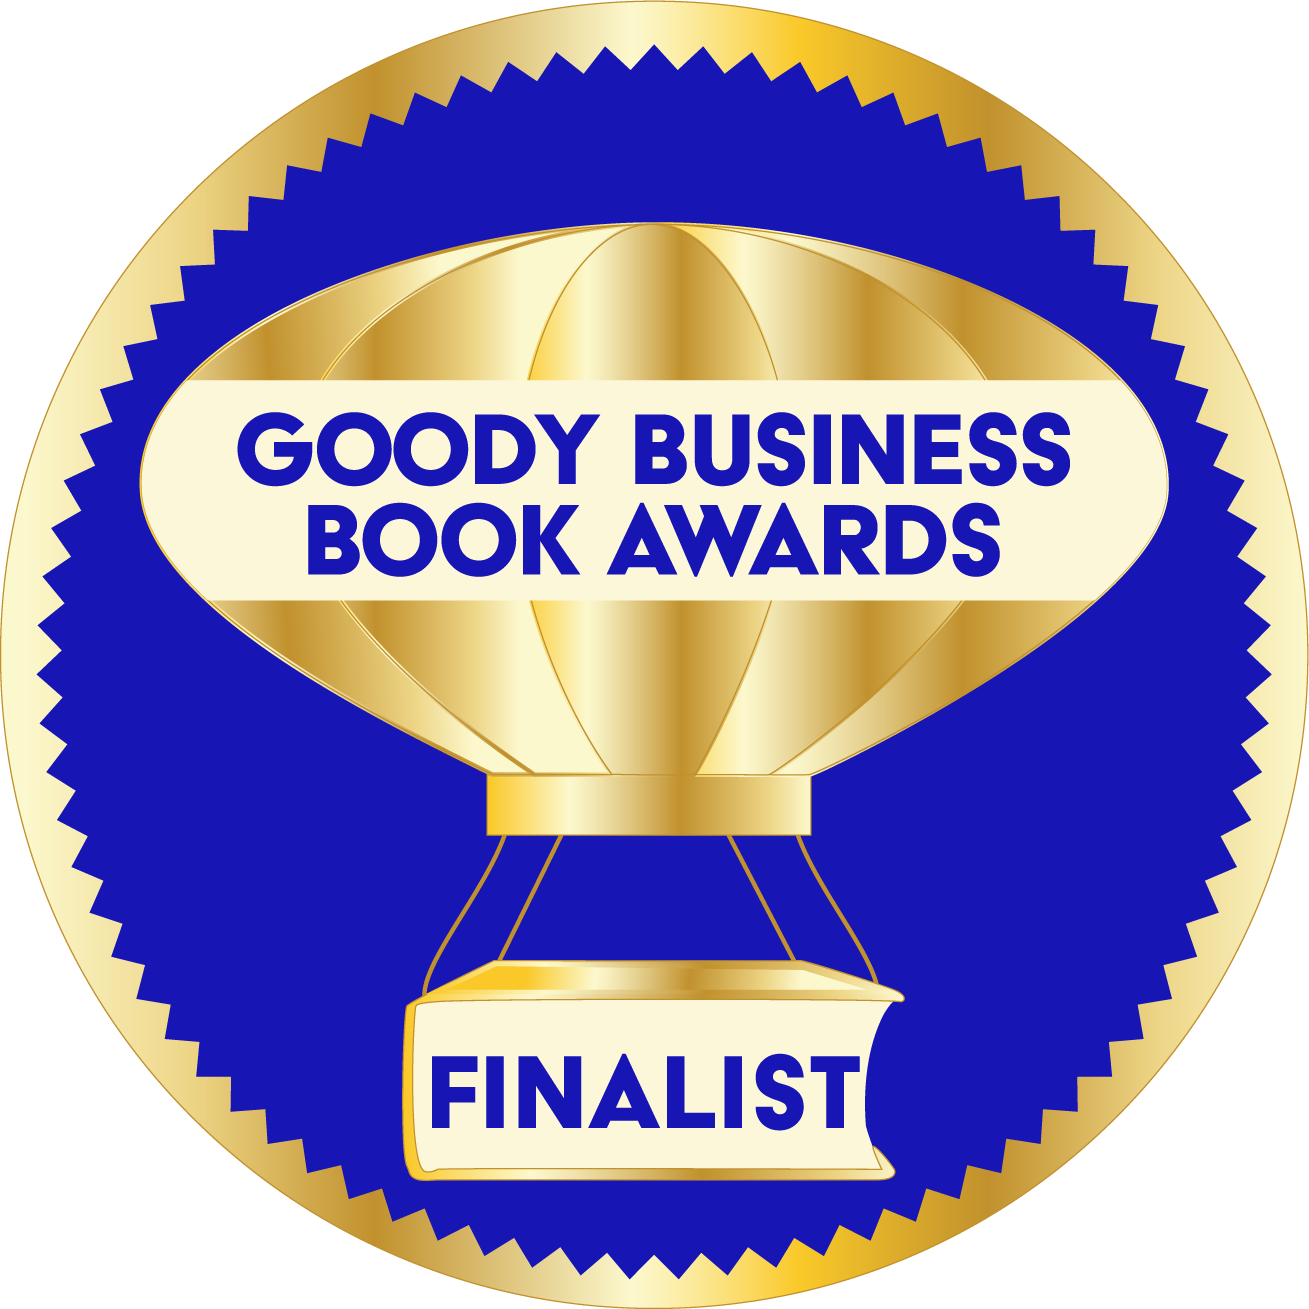 The Goody Business Book Awards awards seal is a hot air balloon with a basket as a book to represent their mission to "Uplift Author Voices" so they can stand out in a sea of millions published today.